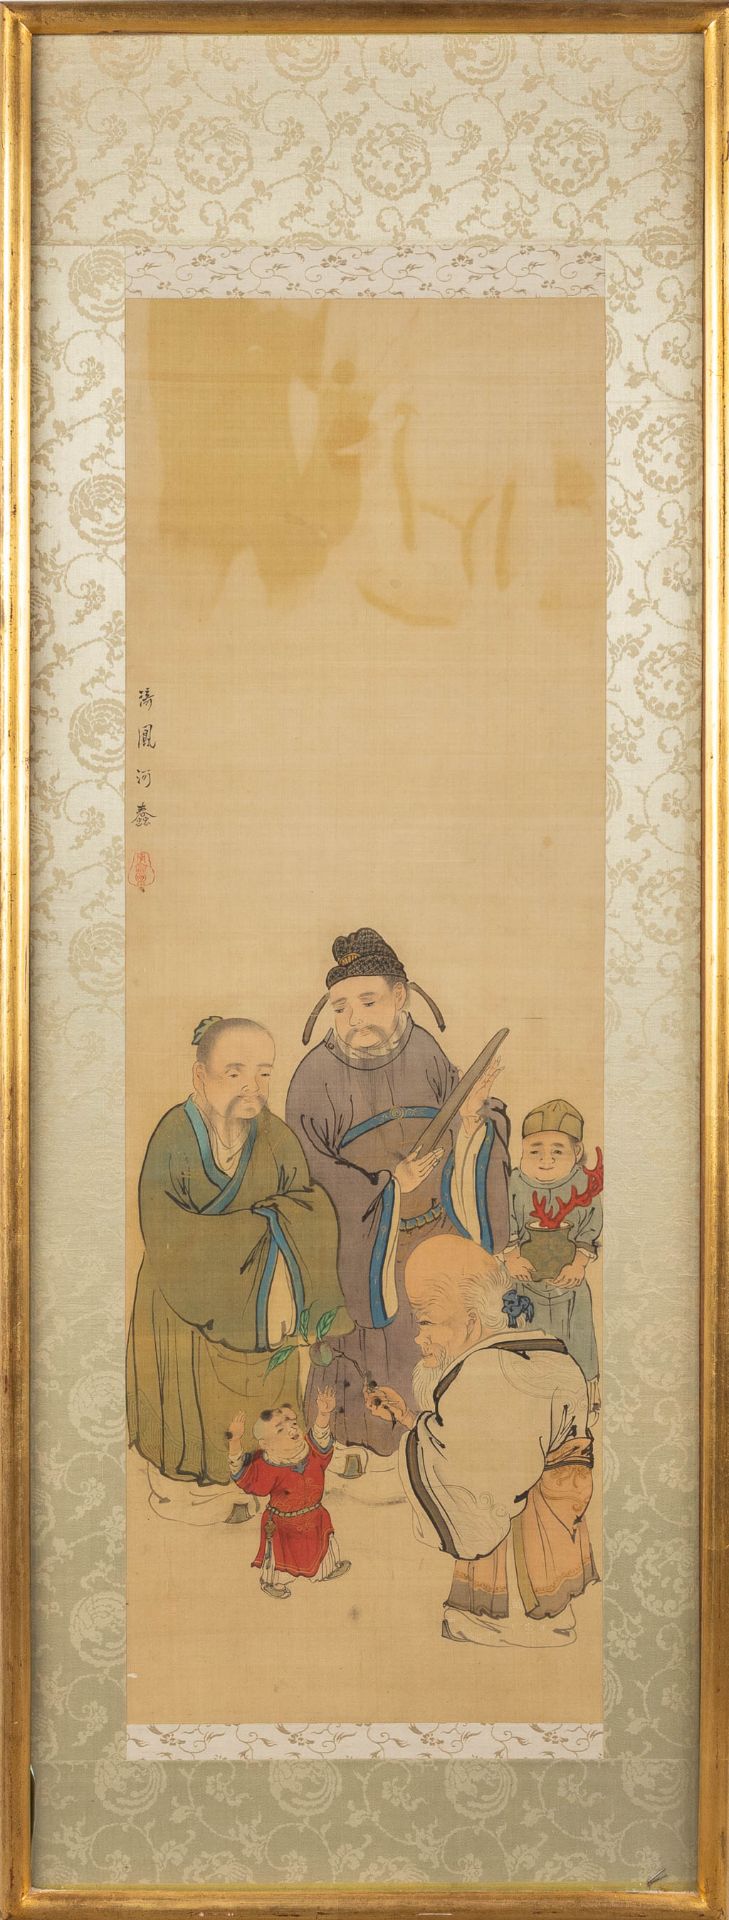 An antique Chinese painting on silk. 19th/20th C. (W:35 x H:108 cm) - Image 3 of 6